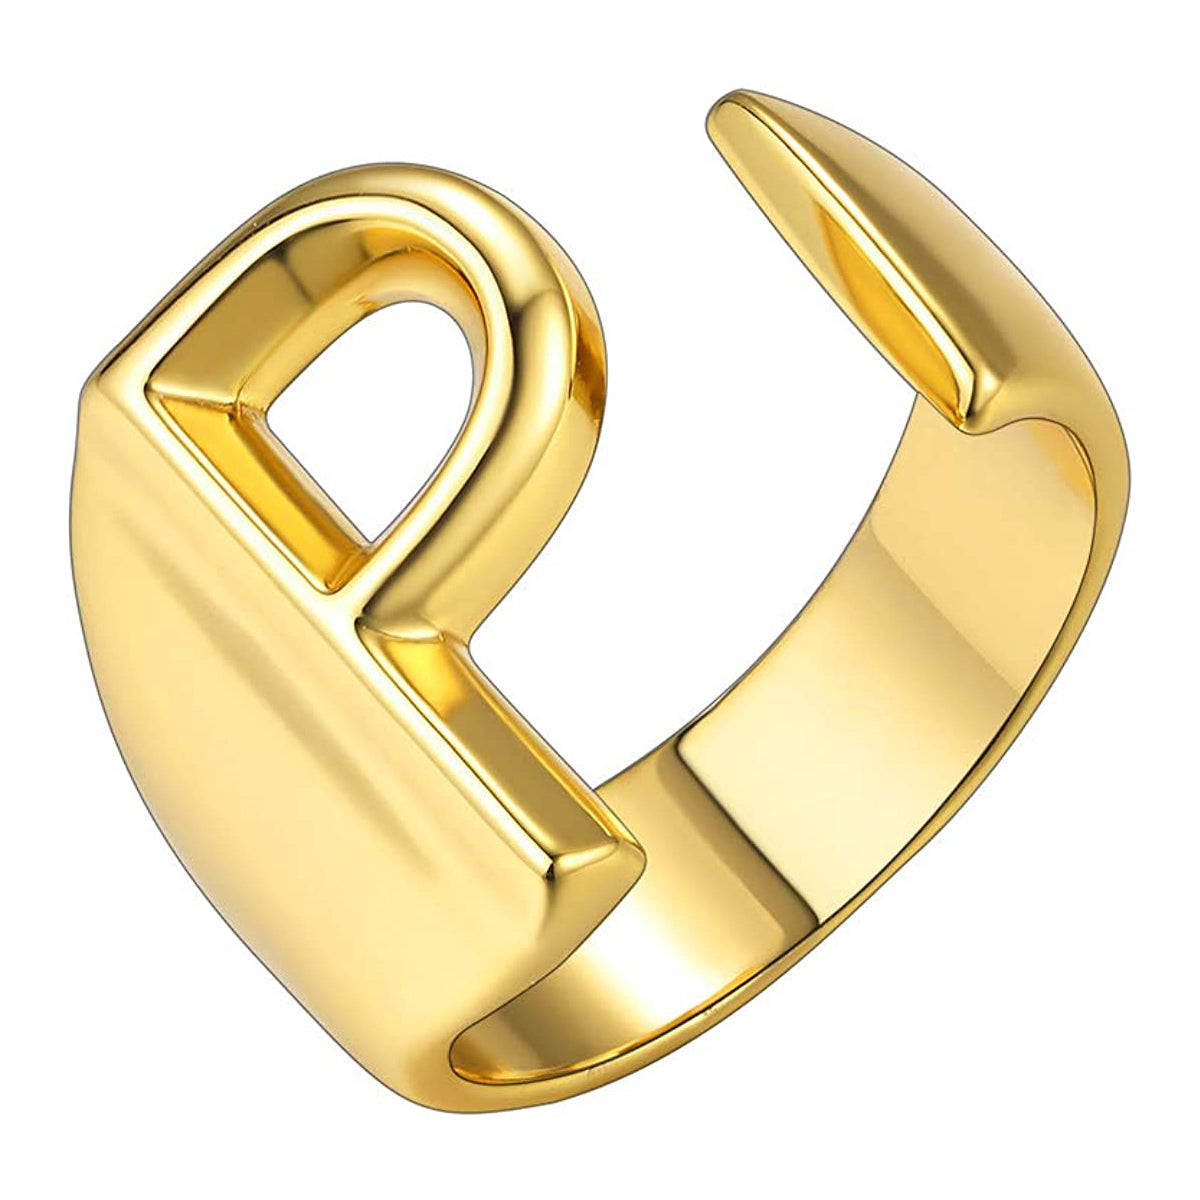 MEENAZ CZ AD Valentine American diamond Adjustable I Love You Heart Initial  Letter Name Alphabet P Couple Finger Rings for women Men Boys girls  girlfriend Husband Wife couples lovers Stylish Gold Ring :